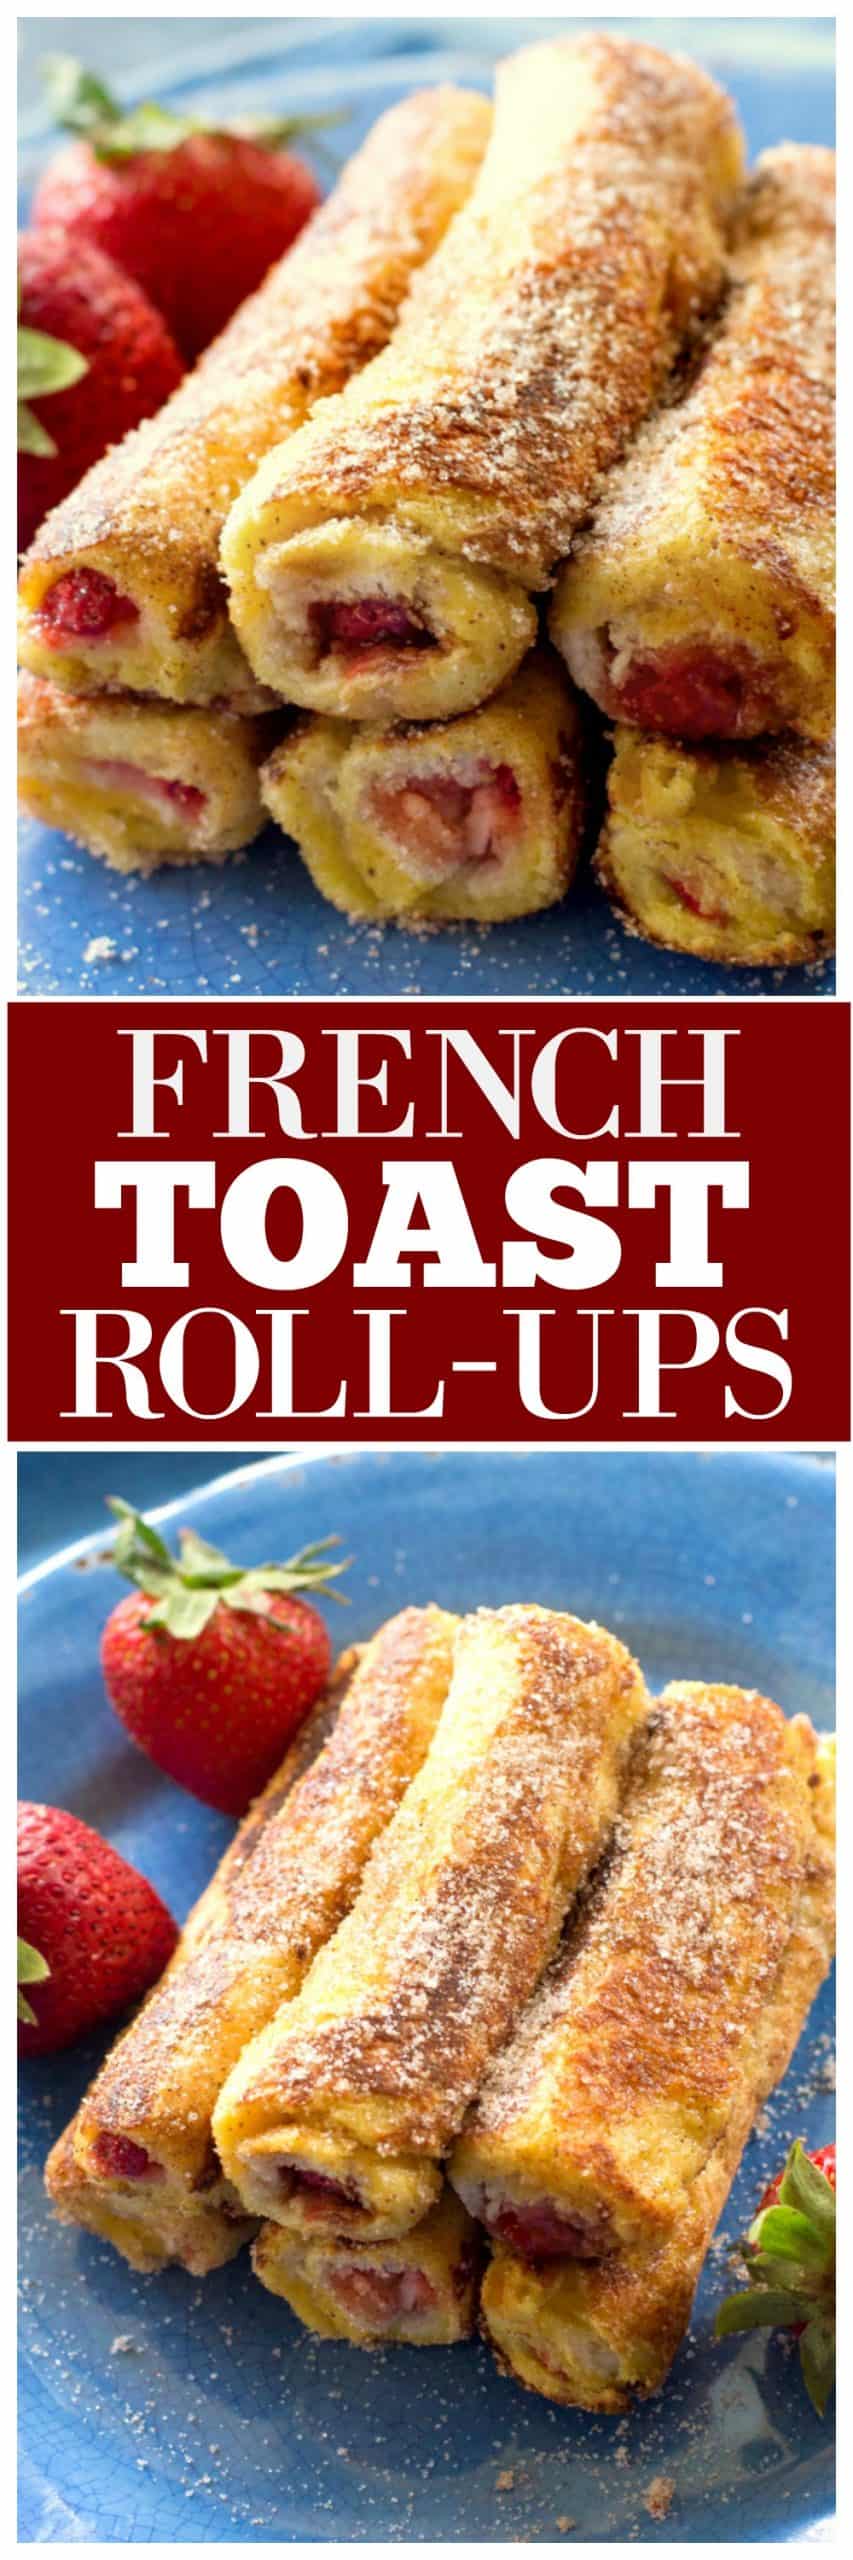 French Toast Roll-Ups (+VIDEO) - The Girl Who Ate Everything